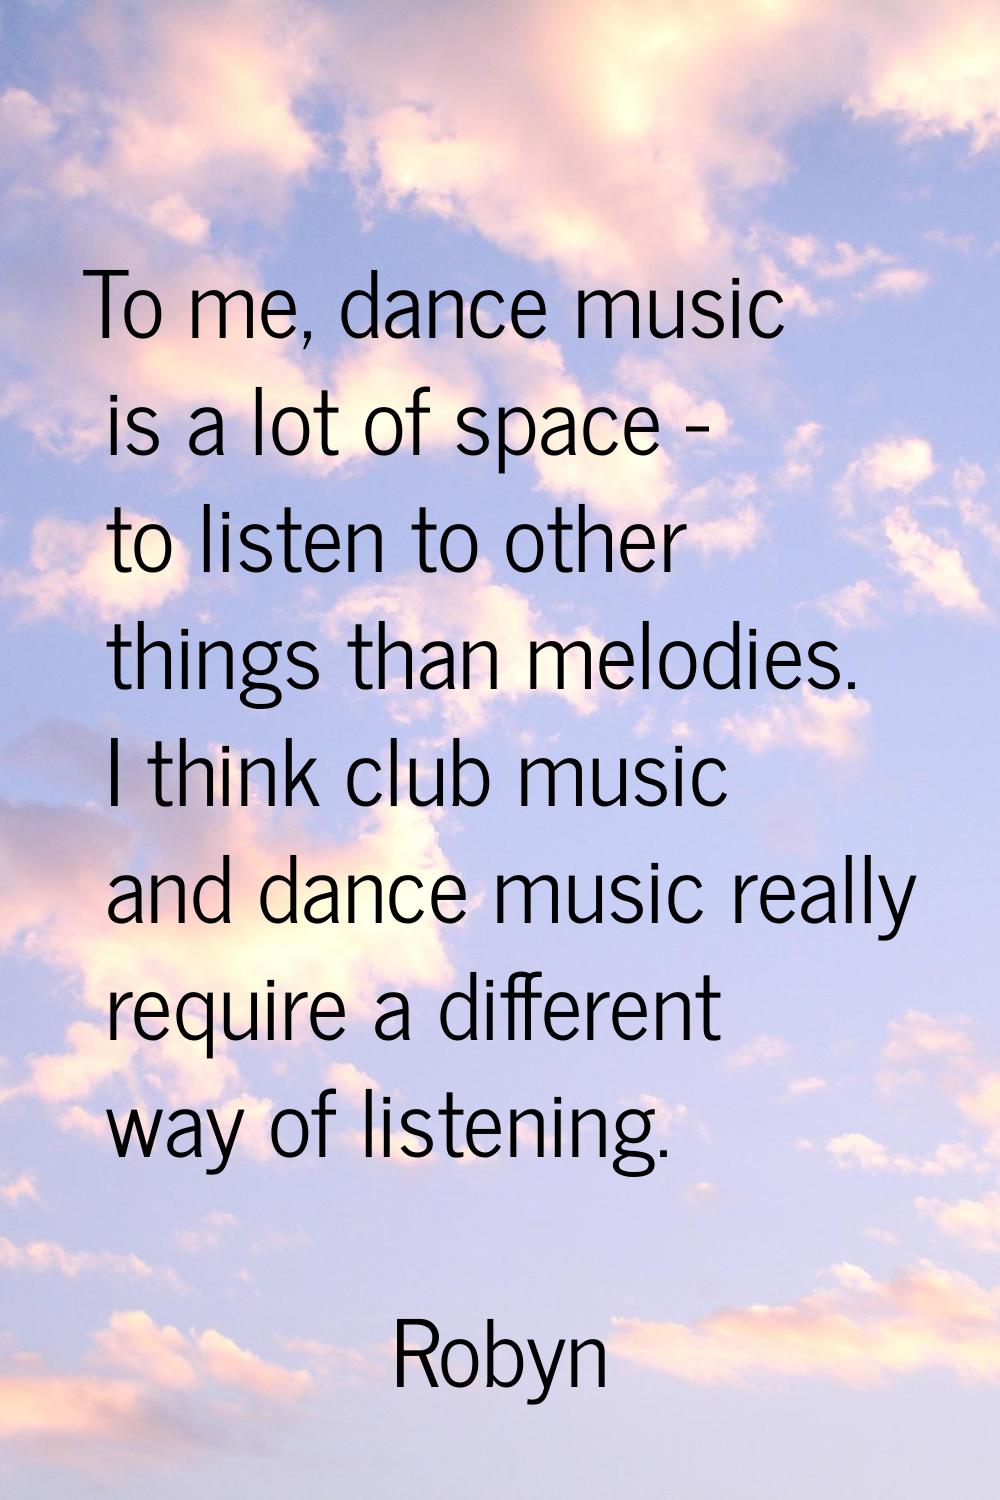 To me, dance music is a lot of space - to listen to other things than melodies. I think club music 